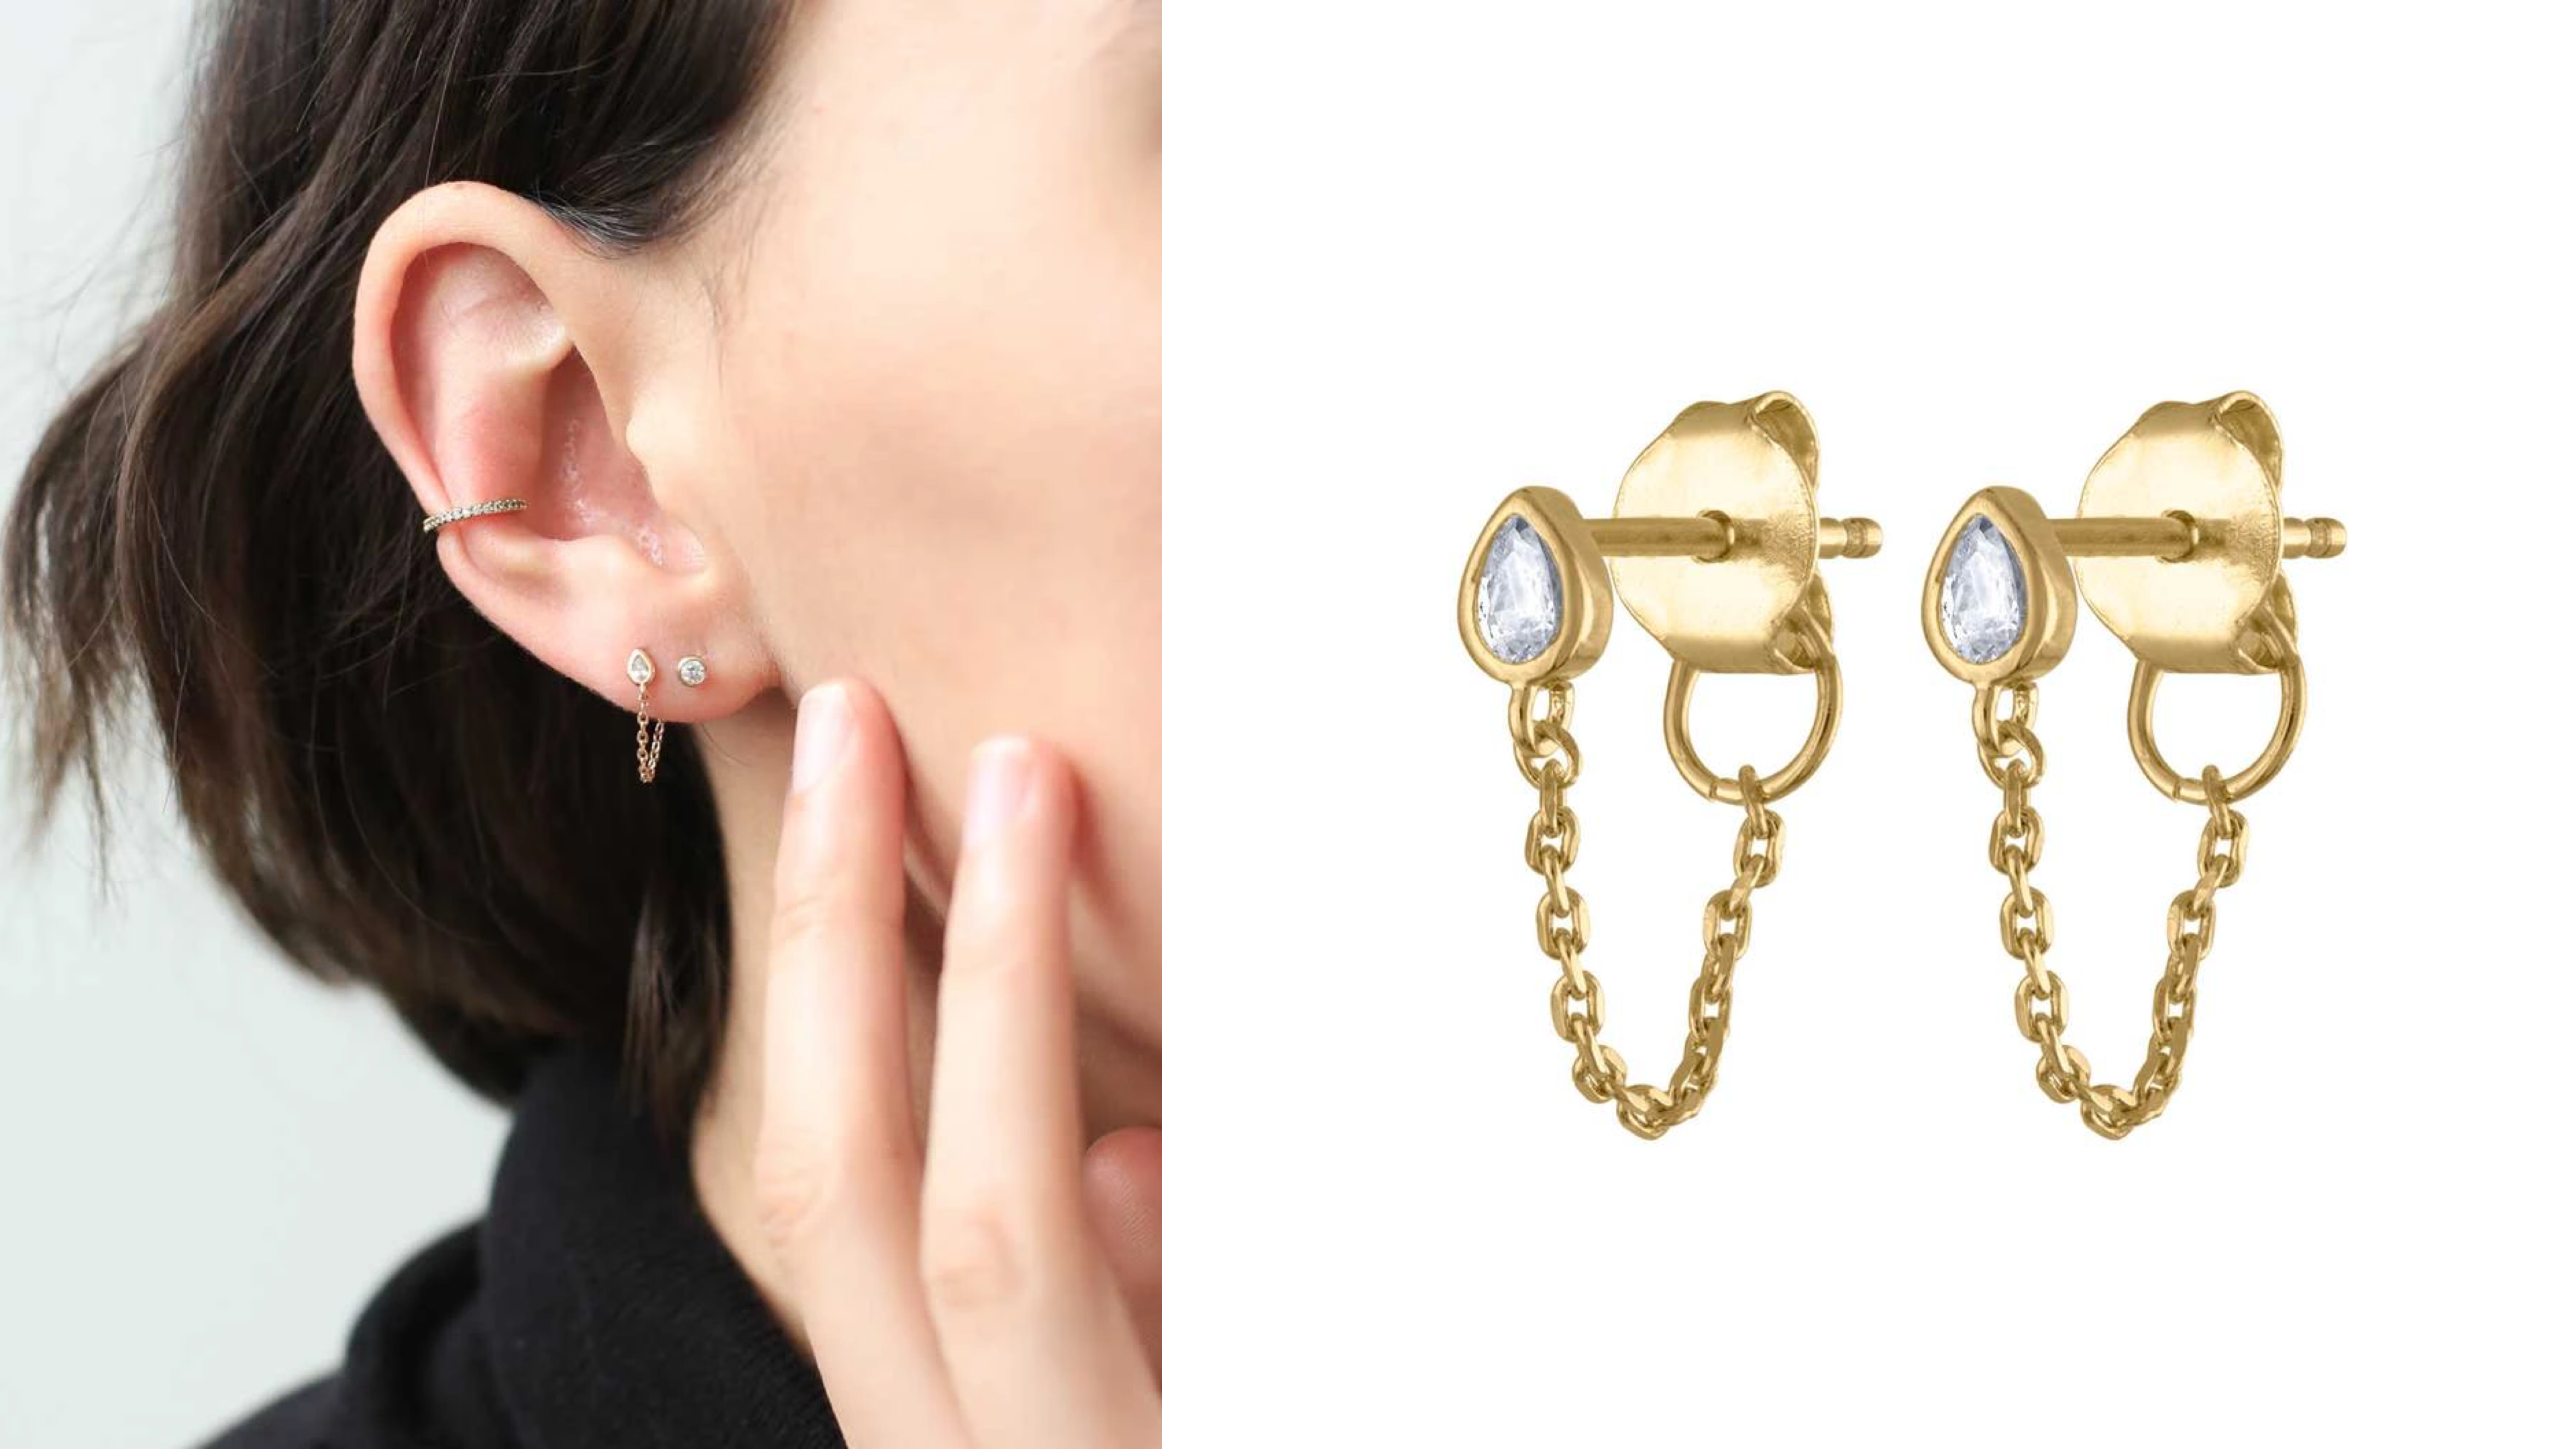 gold-plated earrings